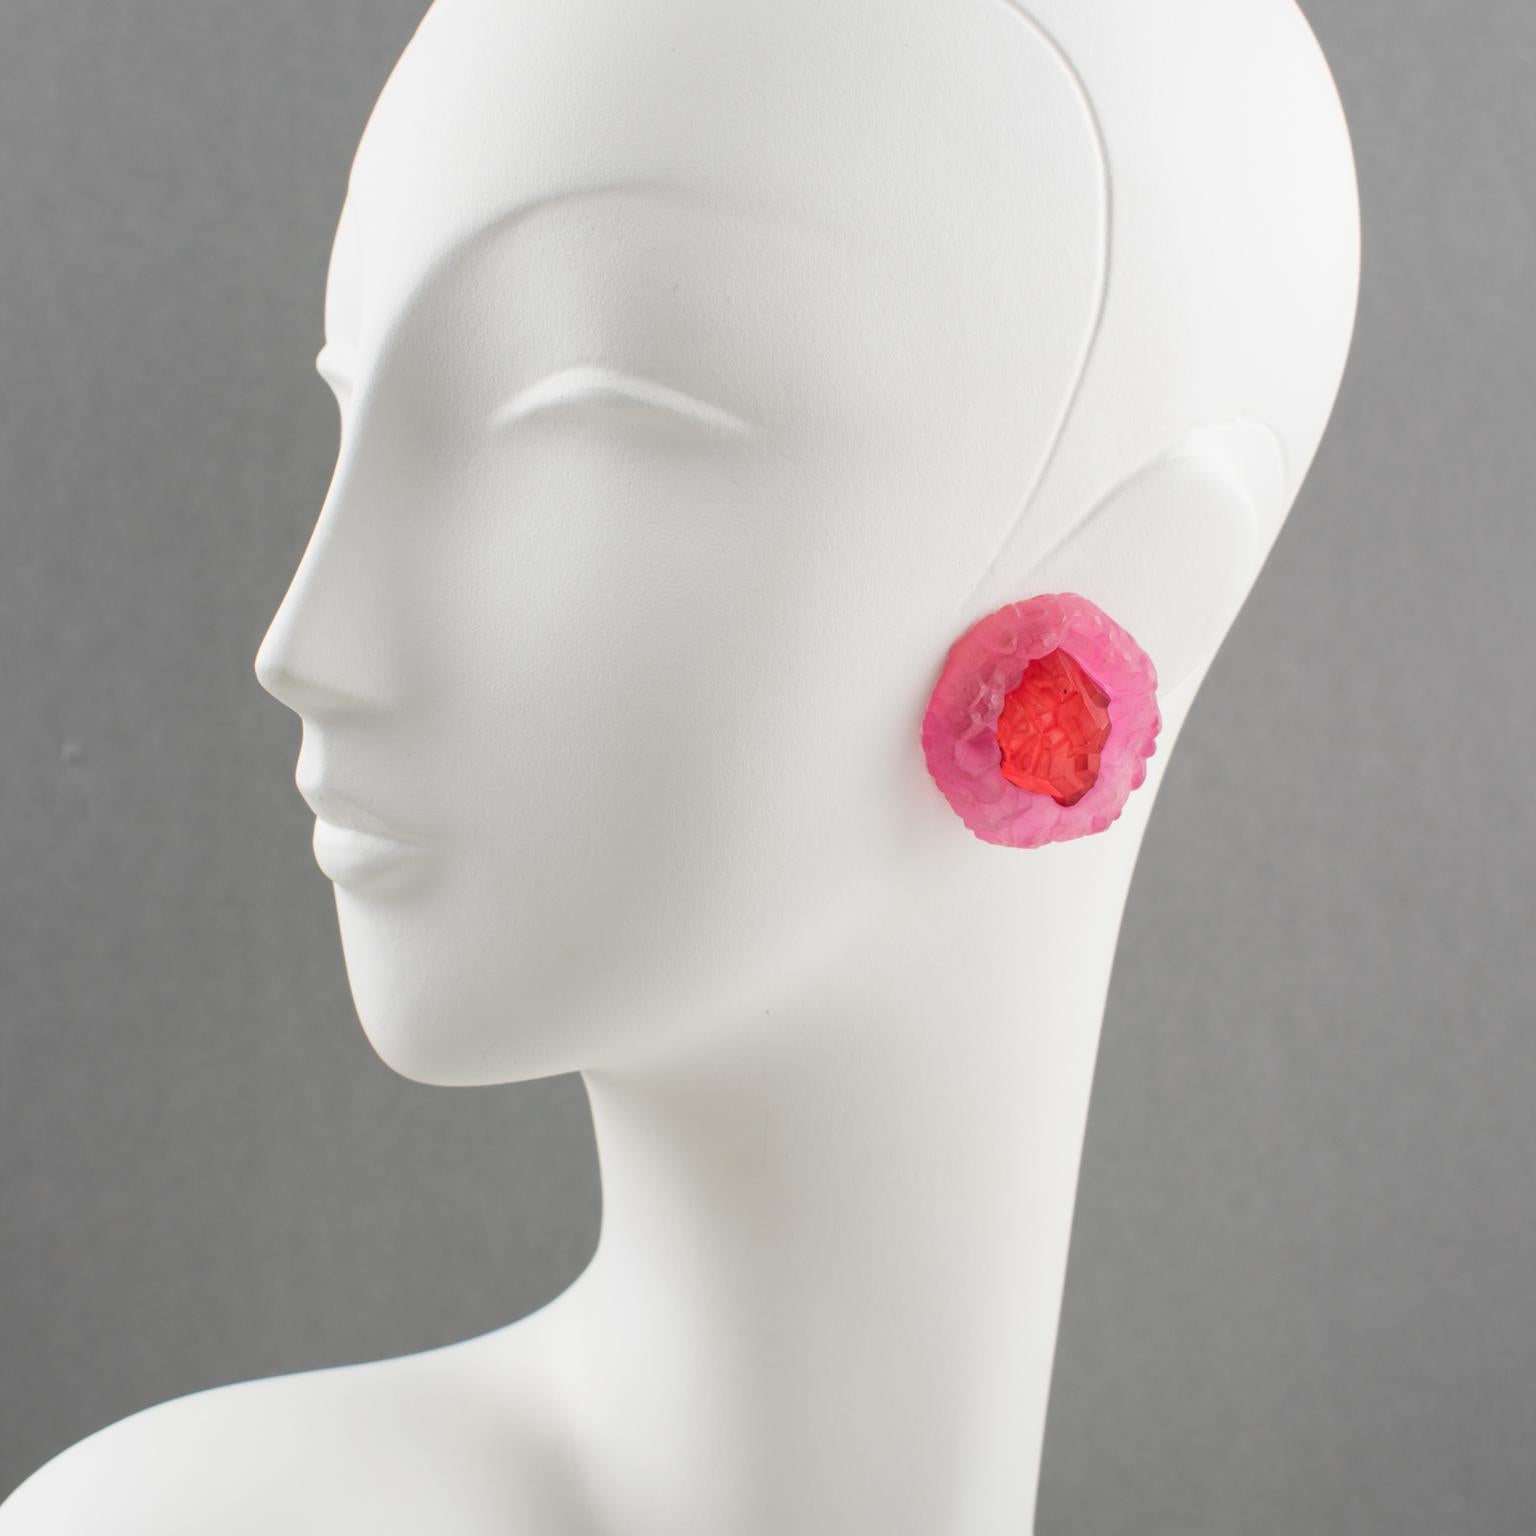 Impressive oversized carved Lucite clip earrings from an Italian design studio. Dimensional rounded shape with rock carving in luminous ruby red and bubble gum pink colors in a frosted textured pattern. Very unusual shape. There is no visible